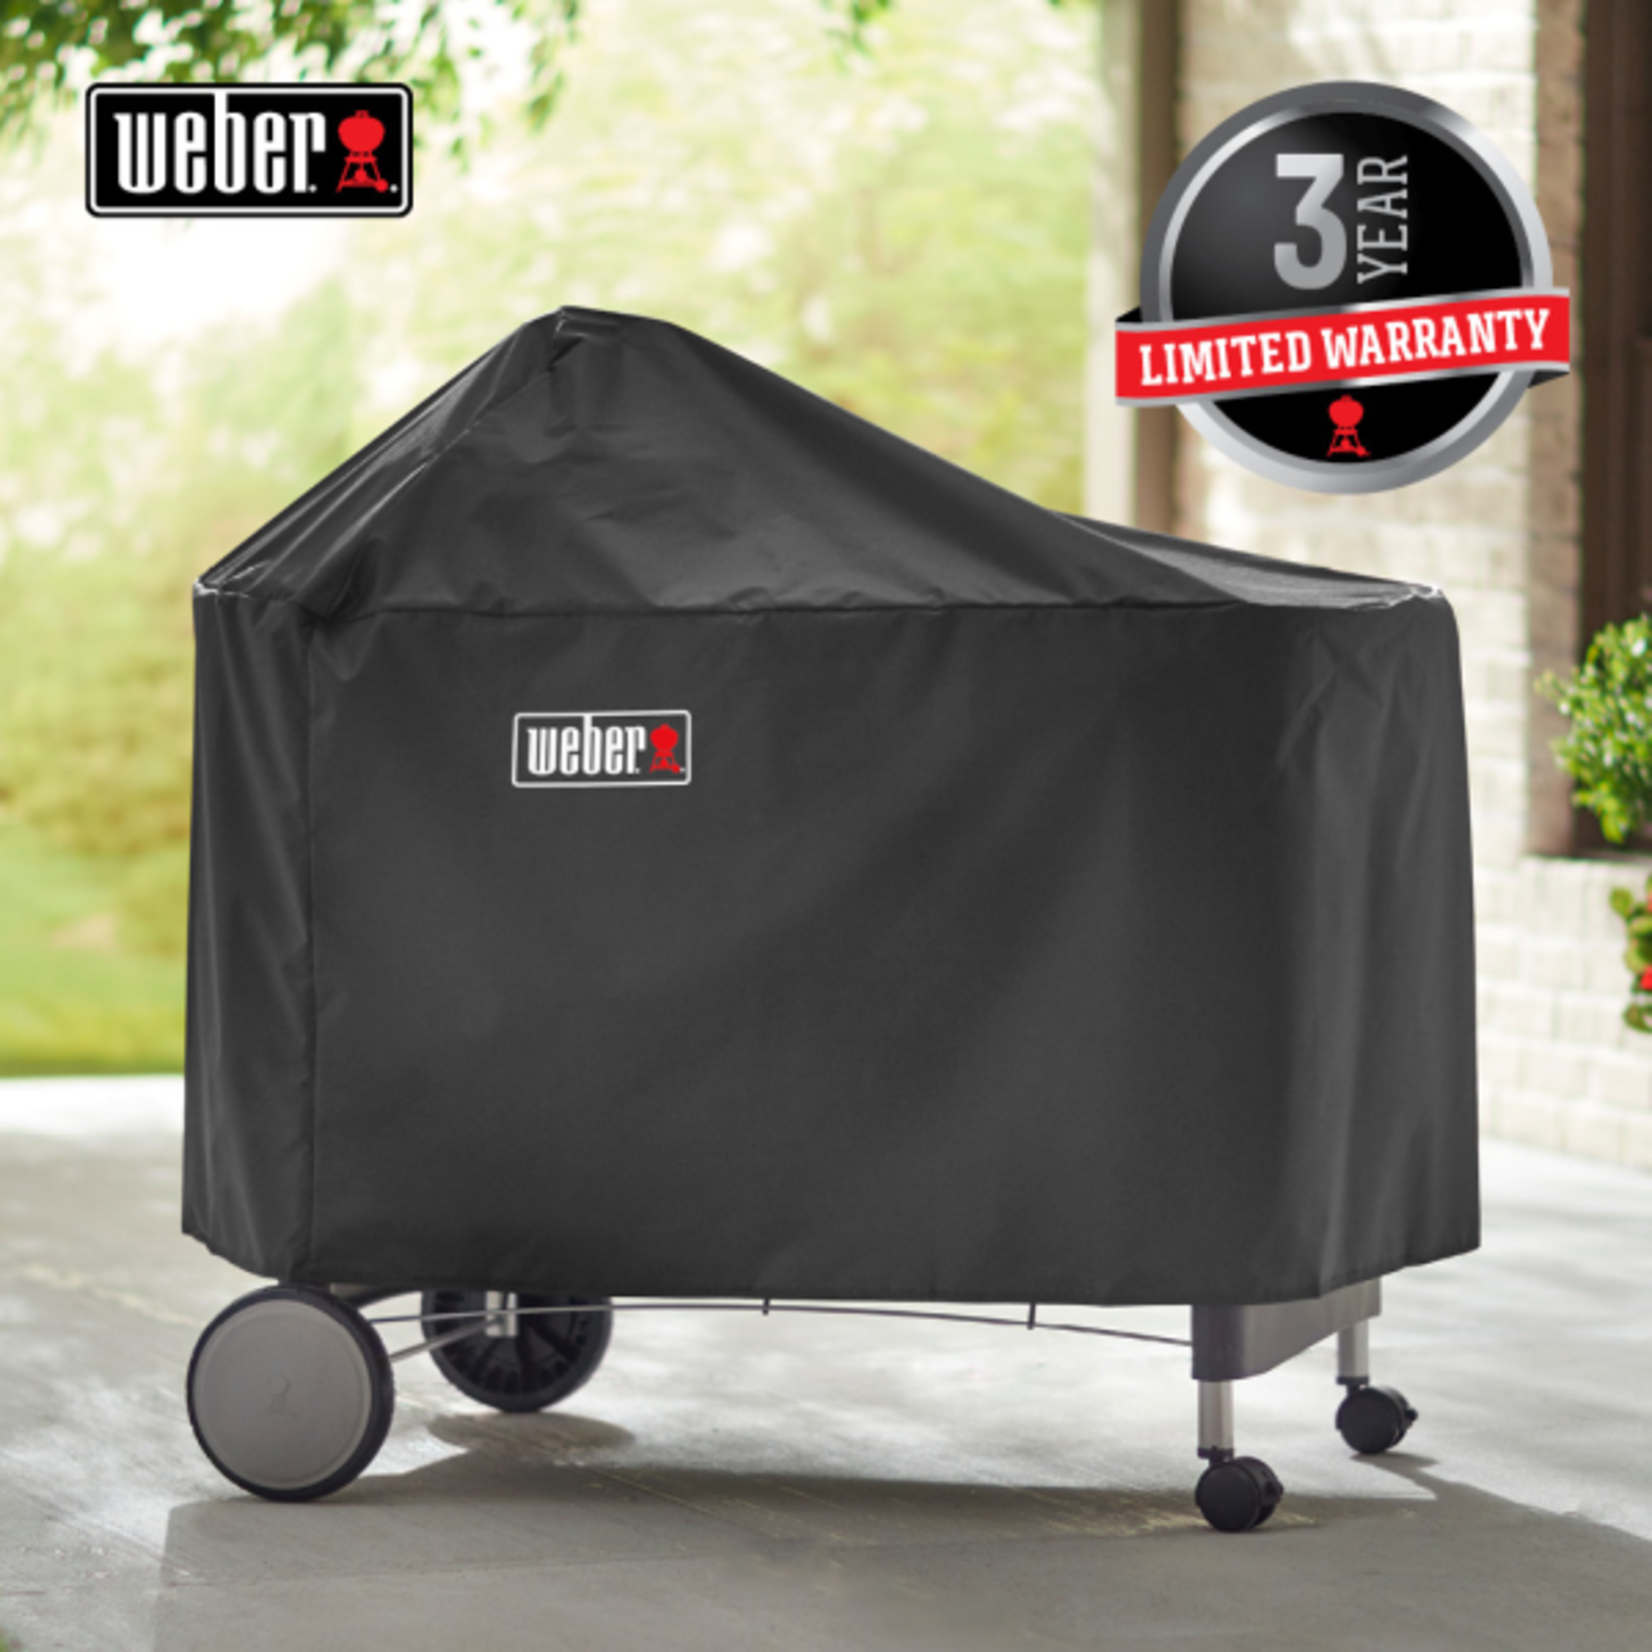 Weber Premium Grill Cover - Fits Performer Premium and Deluxe 22' charcoal grills